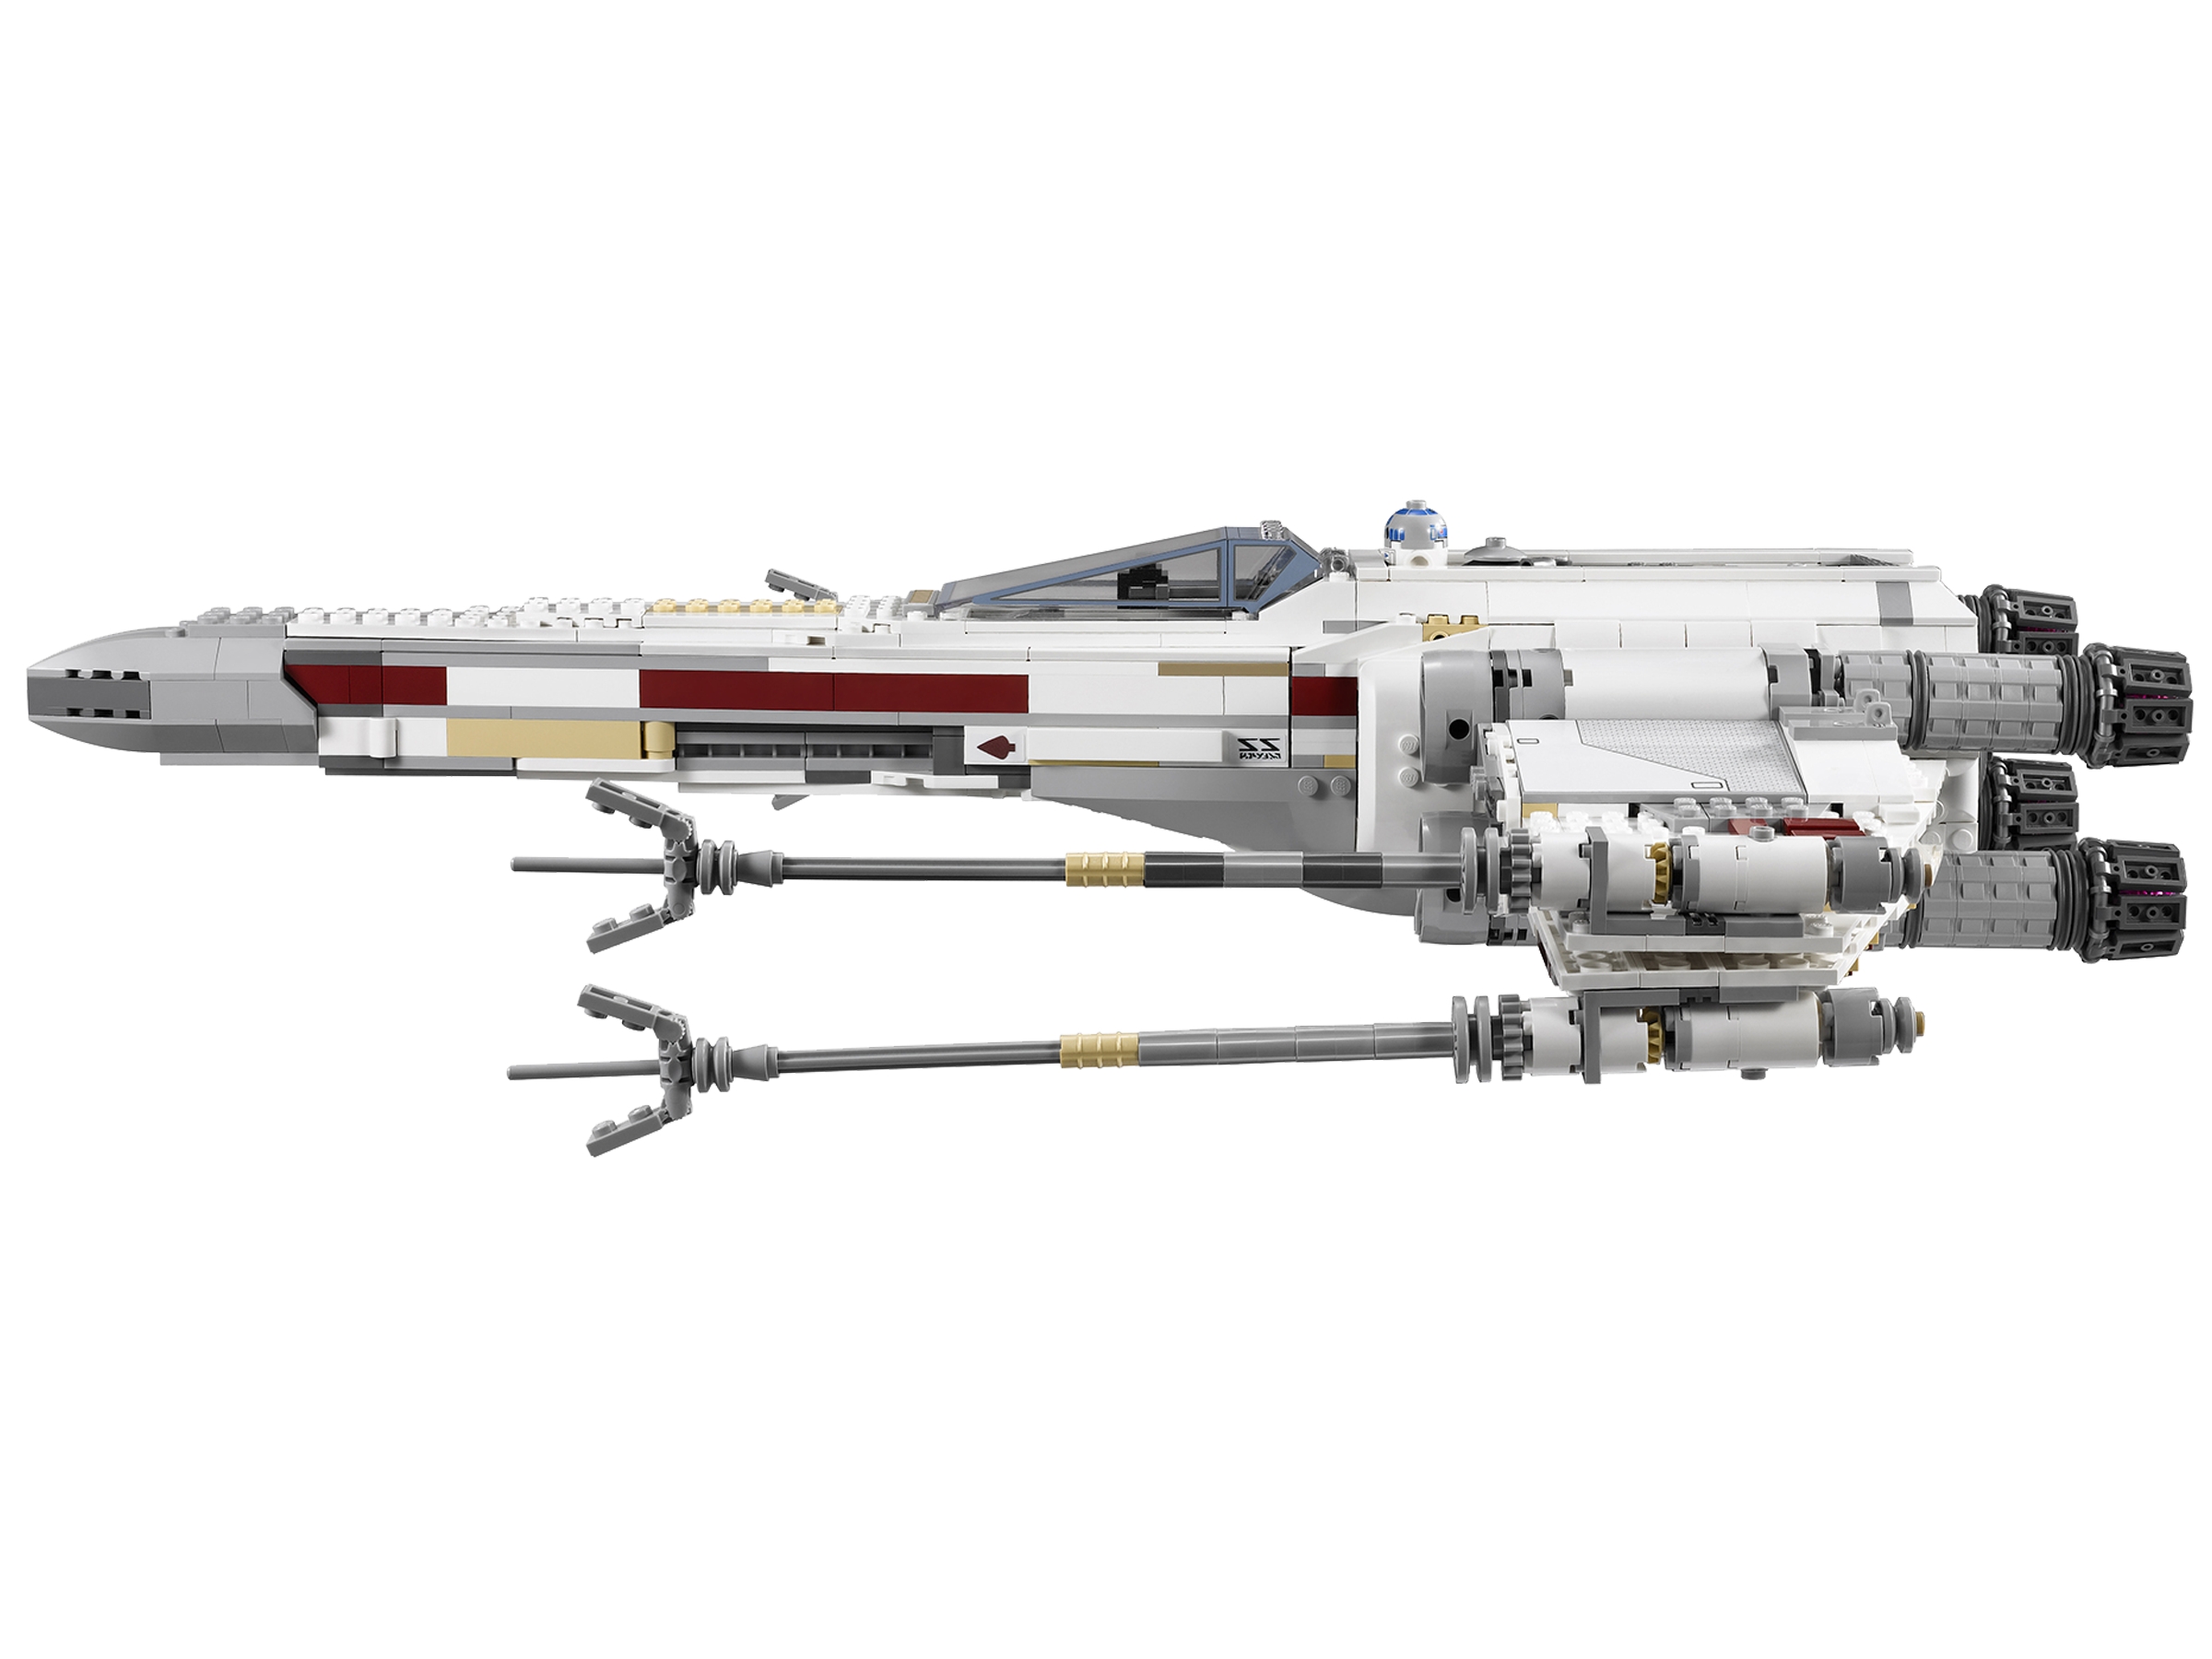 LEGO Star Wars Red Five X-Wing Starfighter 10240 Retired Ultimate Collector UCS 